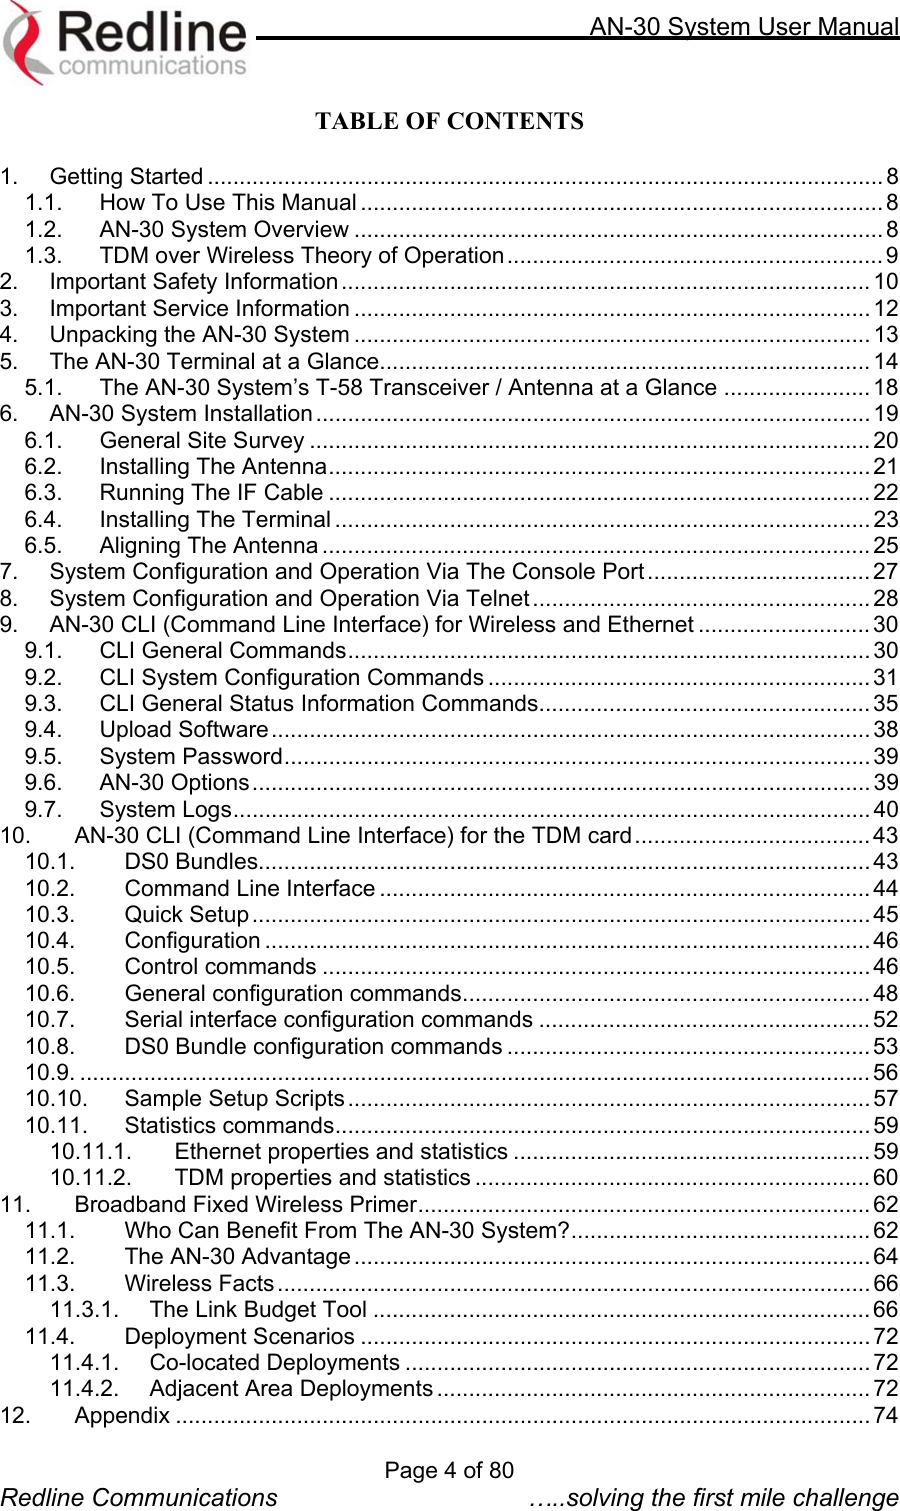     AN-30 System User Manual  TABLE OF CONTENTS  1. Getting Started .......................................................................................................... 8 1.1. How To Use This Manual ..................................................................................8 1.2. AN-30 System Overview ................................................................................... 8 1.3. TDM over Wireless Theory of Operation...........................................................9 2. Important Safety Information...................................................................................10 3. Important Service Information ................................................................................. 12 4. Unpacking the AN-30 System ................................................................................. 13 5. The AN-30 Terminal at a Glance............................................................................. 14 5.1. The AN-30 System’s T-58 Transceiver / Antenna at a Glance ....................... 18 6. AN-30 System Installation.......................................................................................19 6.1. General Site Survey ........................................................................................ 20 6.2. Installing The Antenna..................................................................................... 21 6.3. Running The IF Cable .....................................................................................22 6.4. Installing The Terminal ....................................................................................23 6.5. Aligning The Antenna ...................................................................................... 25 7. System Configuration and Operation Via The Console Port ................................... 27 8. System Configuration and Operation Via Telnet.....................................................28 9. AN-30 CLI (Command Line Interface) for Wireless and Ethernet ........................... 30 9.1. CLI General Commands.................................................................................. 30 9.2. CLI System Configuration Commands ............................................................ 31 9.3. CLI General Status Information Commands....................................................35 9.4. Upload Software.............................................................................................. 38 9.5. System Password............................................................................................ 39 9.6. AN-30 Options................................................................................................. 39 9.7. System Logs.................................................................................................... 40 10. AN-30 CLI (Command Line Interface) for the TDM card.....................................43 10.1. DS0 Bundles................................................................................................ 43 10.2. Command Line Interface ............................................................................. 44 10.3. Quick Setup................................................................................................. 45 10.4. Configuration ............................................................................................... 46 10.5. Control commands ...................................................................................... 46 10.6. General configuration commands................................................................ 48 10.7. Serial interface configuration commands .................................................... 52 10.8. DS0 Bundle configuration commands ......................................................... 53 10.9. ............................................................................................................................ 56 10.10. Sample Setup Scripts..................................................................................57 10.11. Statistics commands.................................................................................... 59 10.11.1. Ethernet properties and statistics ........................................................ 59 10.11.2. TDM properties and statistics ..............................................................60 11. Broadband Fixed Wireless Primer....................................................................... 62 11.1. Who Can Benefit From The AN-30 System?............................................... 62 11.2. The AN-30 Advantage ................................................................................. 64 11.3. Wireless Facts............................................................................................. 66 11.3.1. The Link Budget Tool .............................................................................. 66 11.4. Deployment Scenarios ................................................................................ 72 11.4.1. Co-located Deployments .........................................................................72 11.4.2. Adjacent Area Deployments .................................................................... 72 12. Appendix ............................................................................................................. 74 Page 4 of 80 Redline Communications  …..solving the first mile challenge 